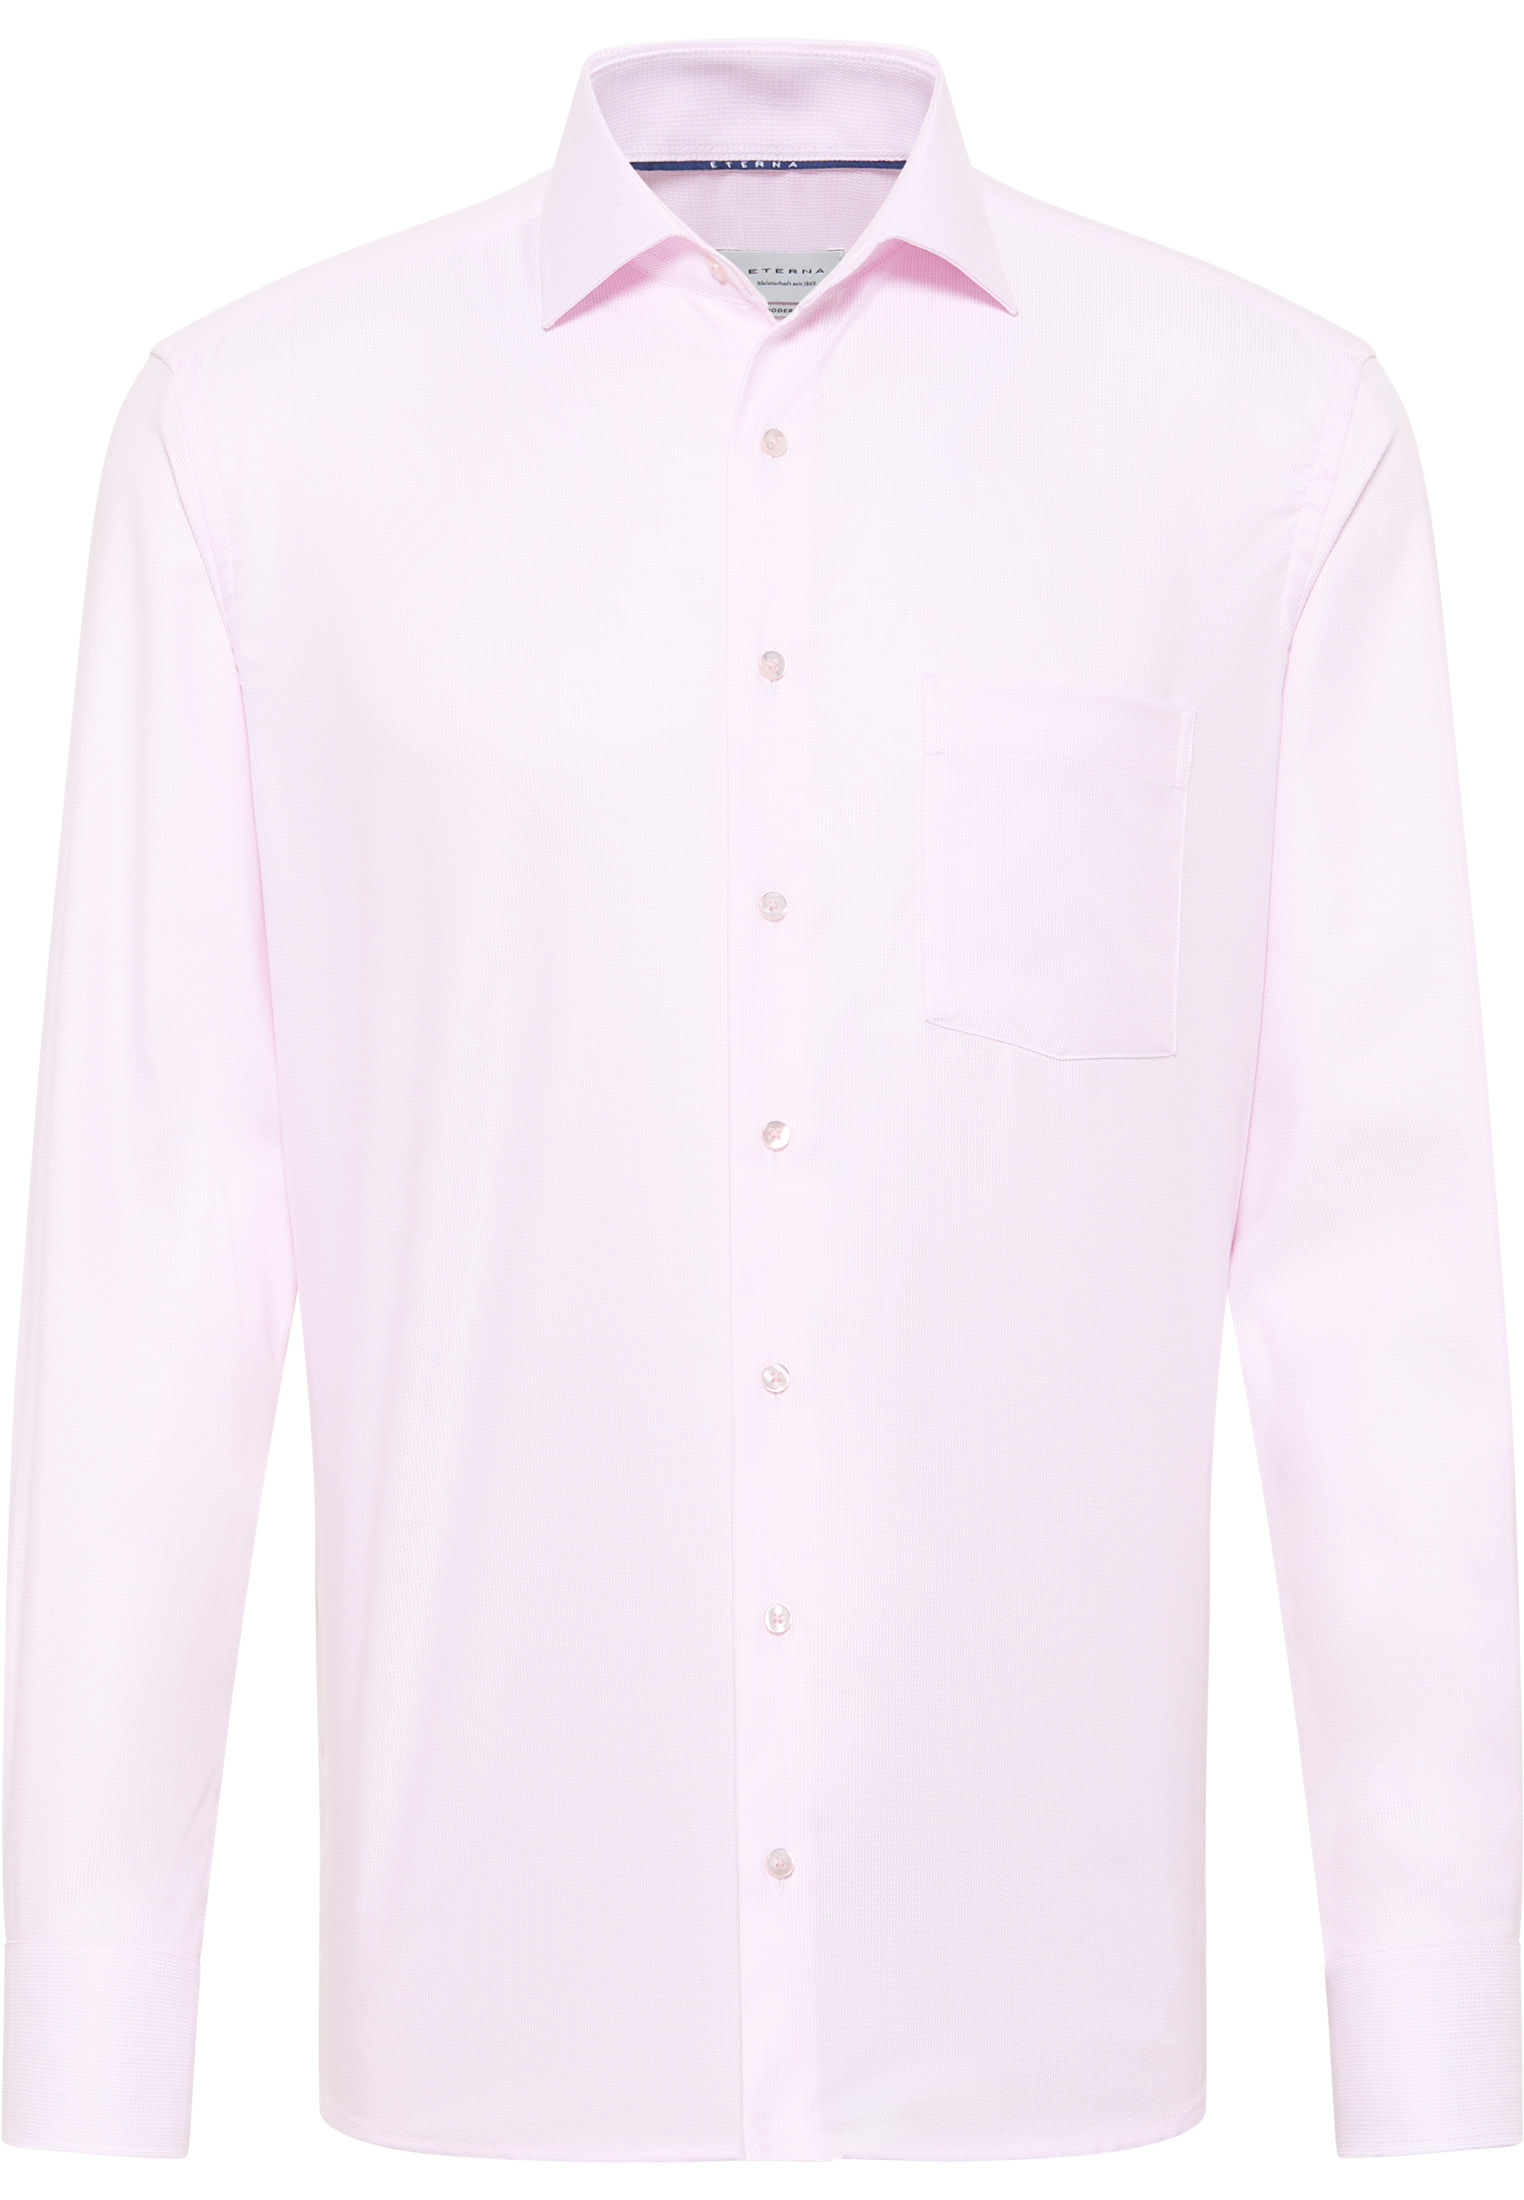 MODERN FIT Shirt in rose structured